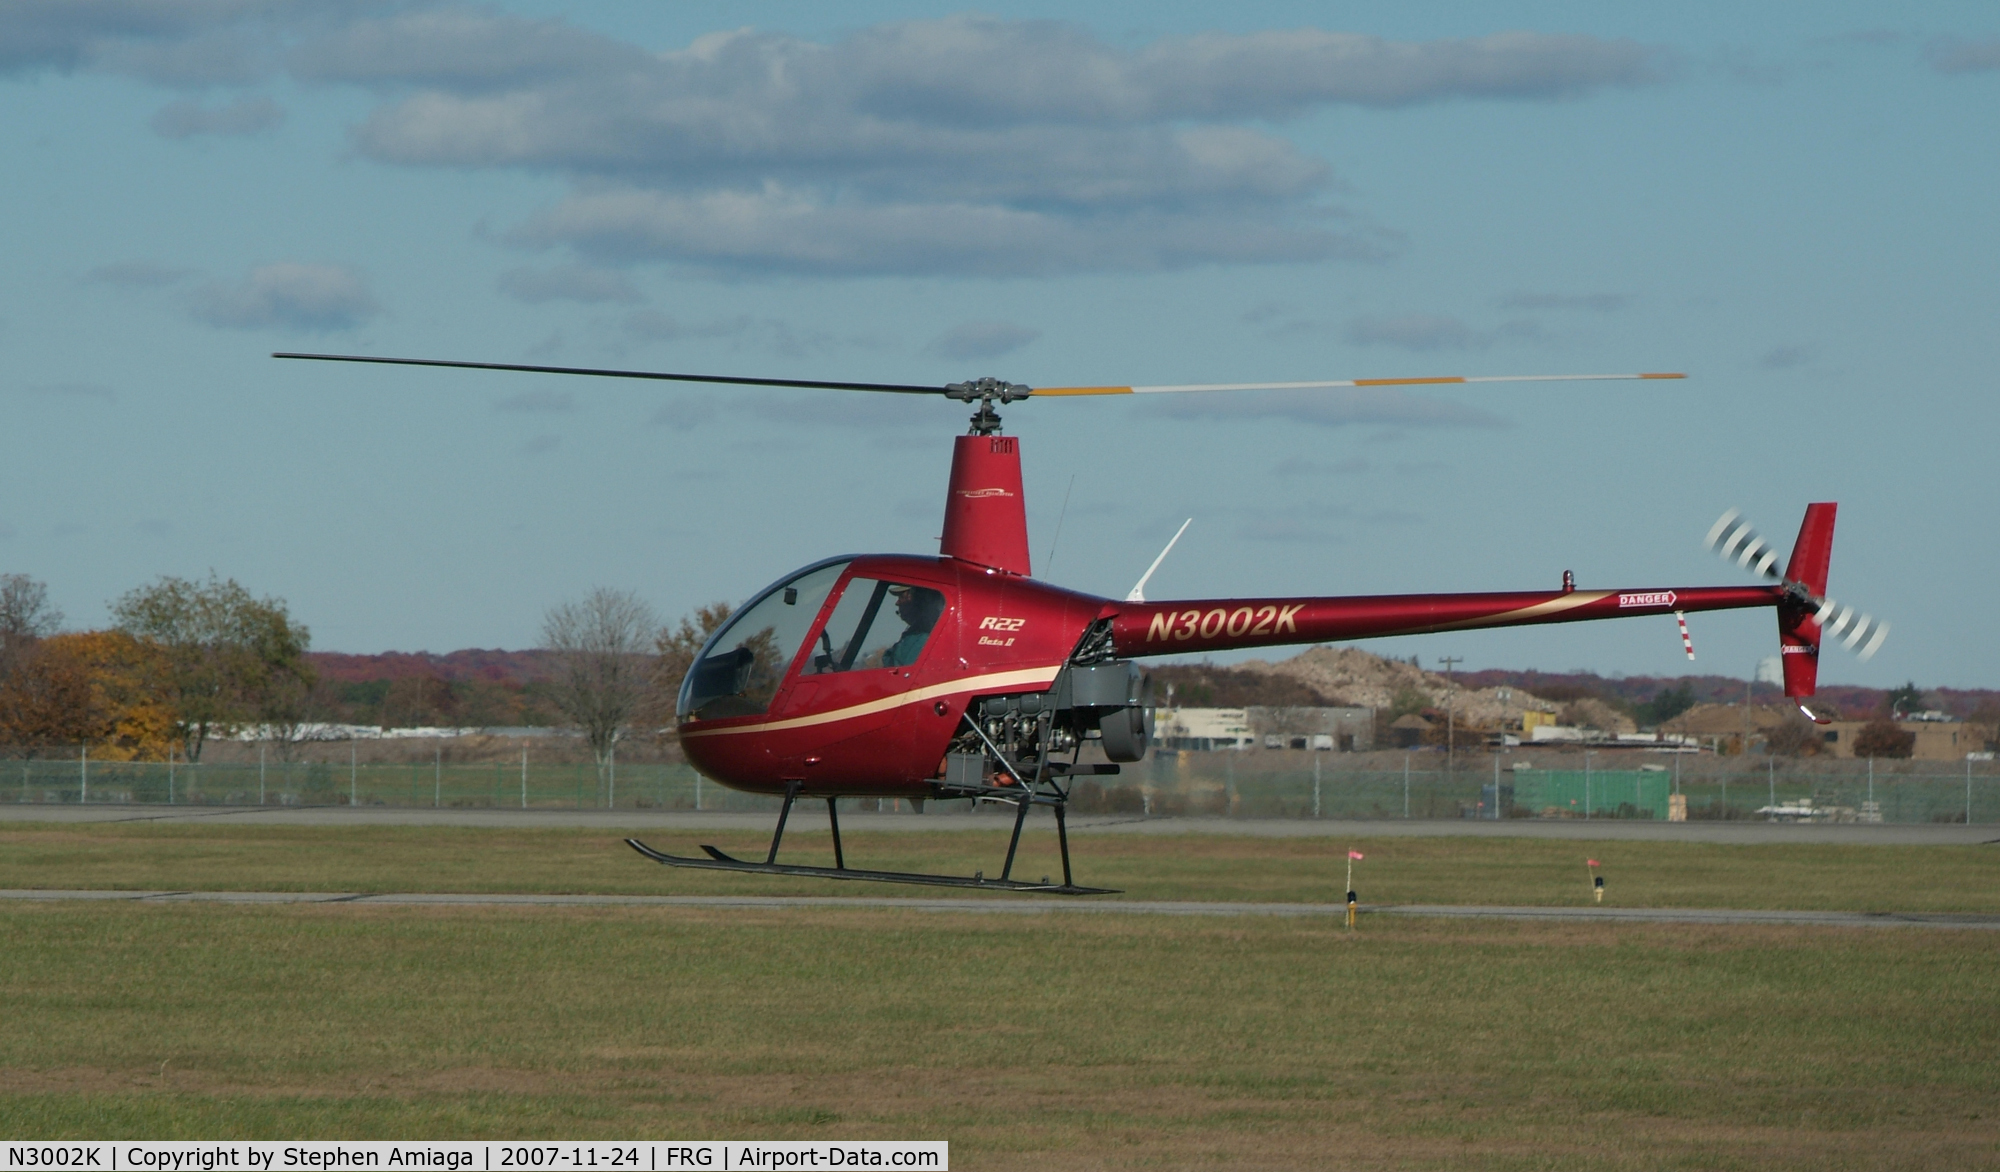 N3002K, 2007 Robinson R22 Beta C/N 4144, Hover work in the 32 Sod - Republic Helicopters